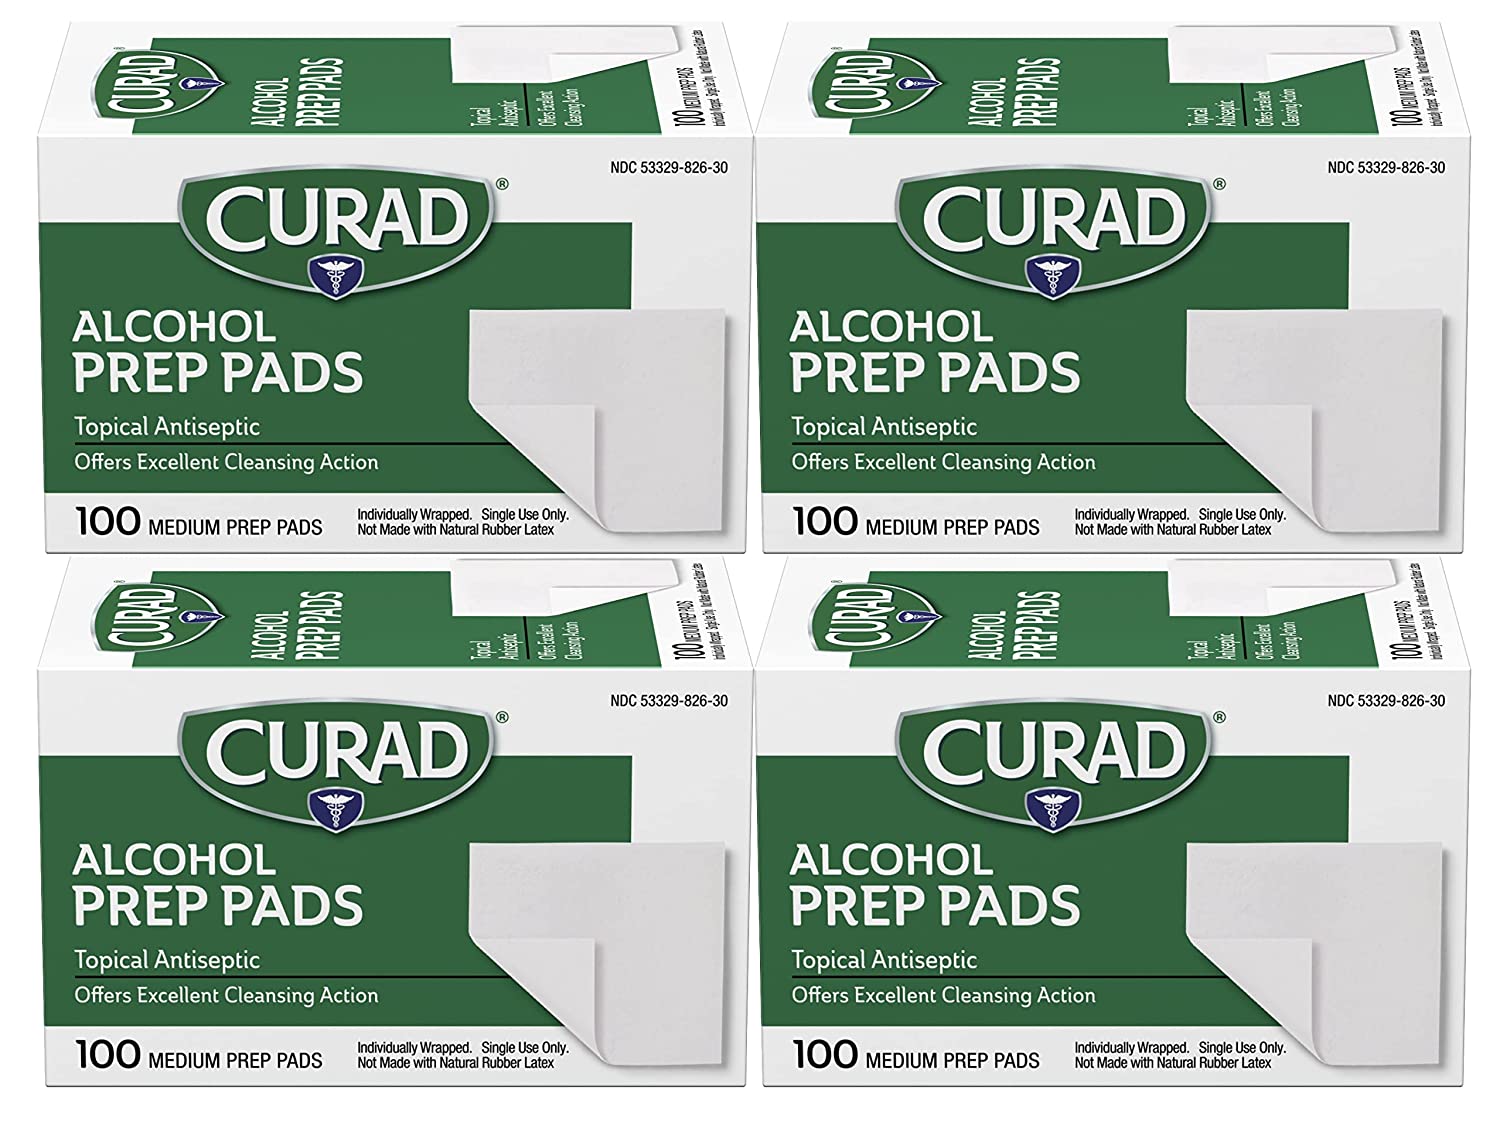 4-Pack 100-Count Curad Alcohol Prep Pads $4.49 + Free Ship w/Prime